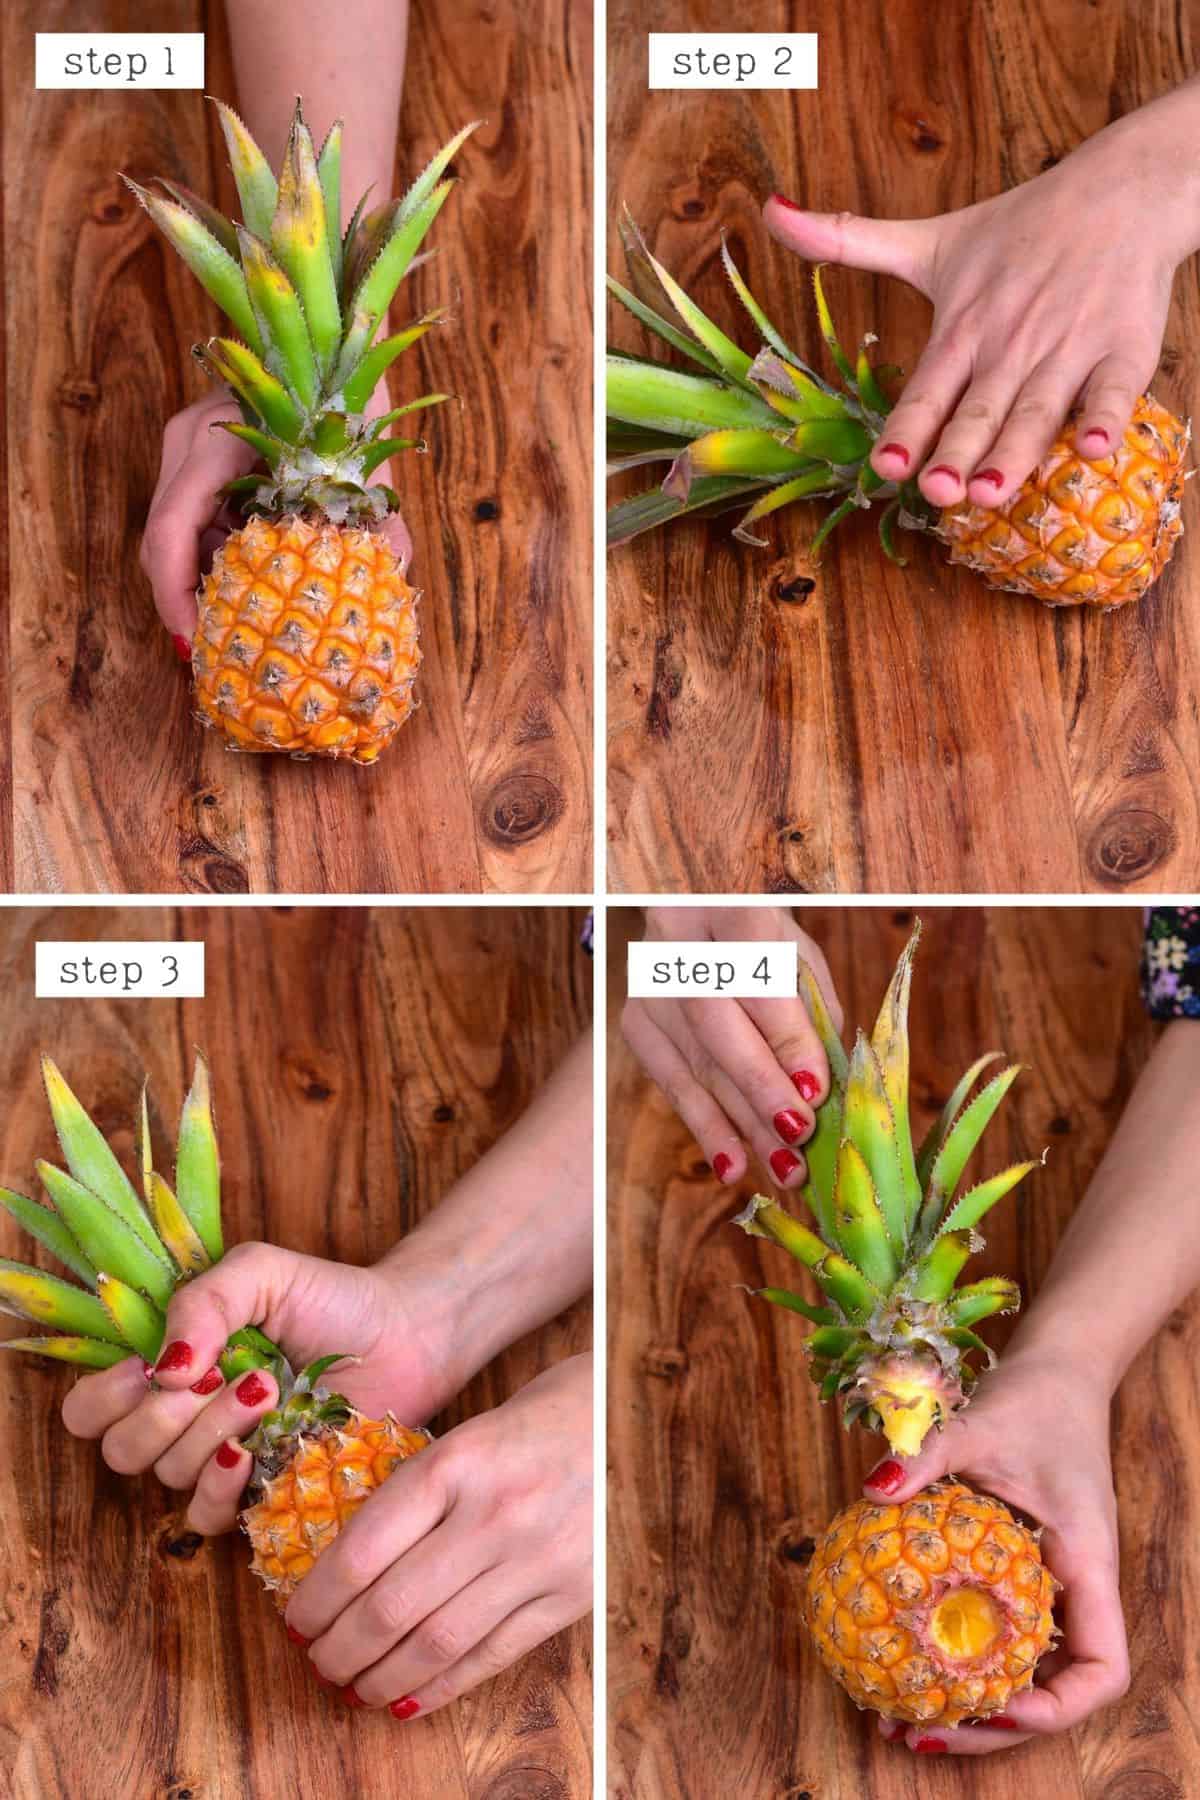 Steps for removing the pineapple crown